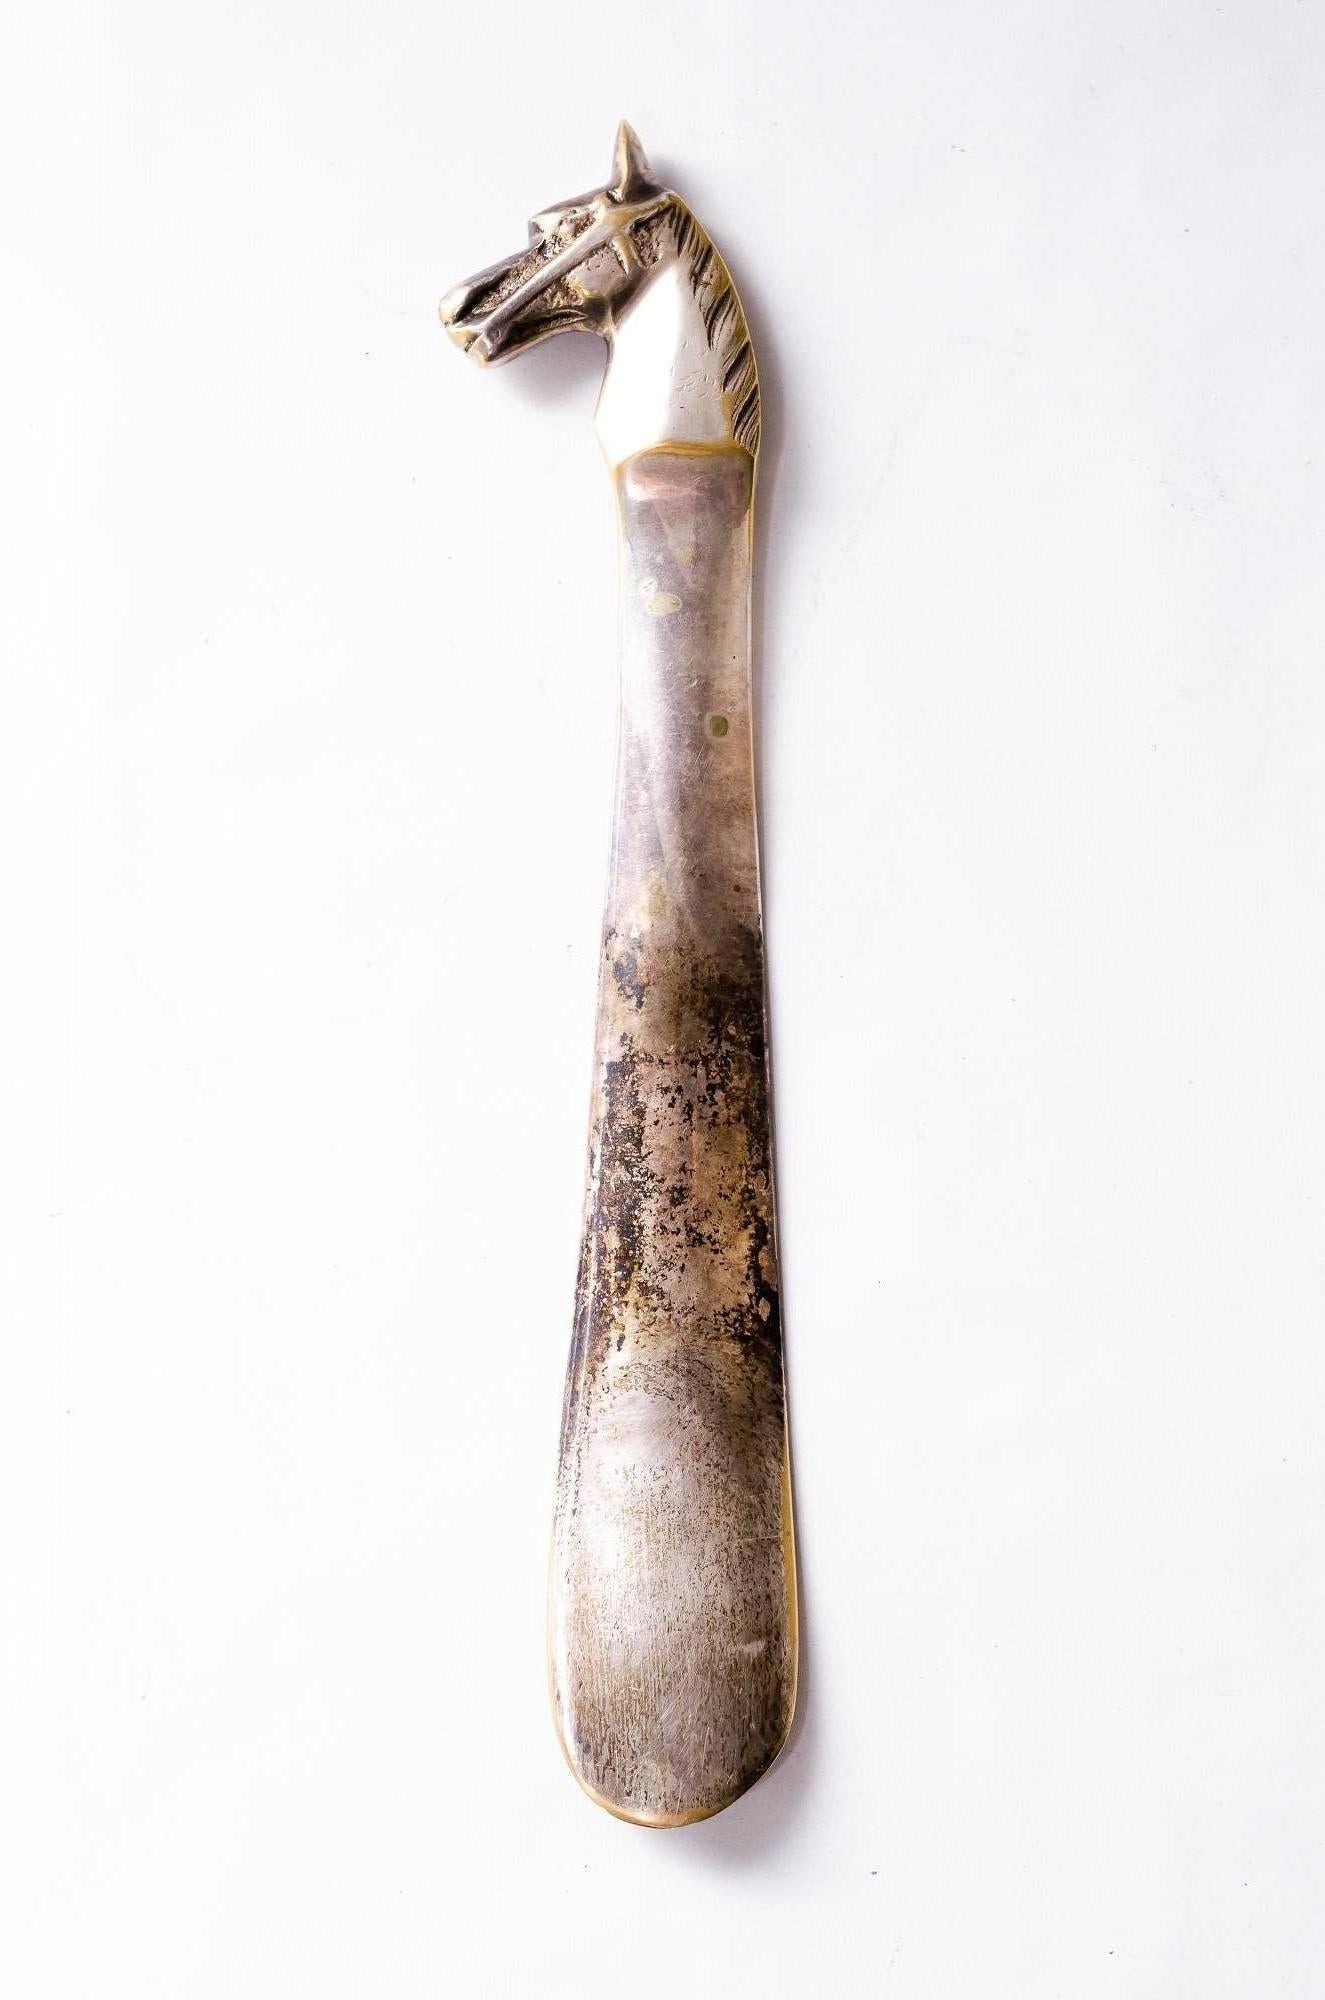 Shoe horn silvered
Brass silvered
Original condition.